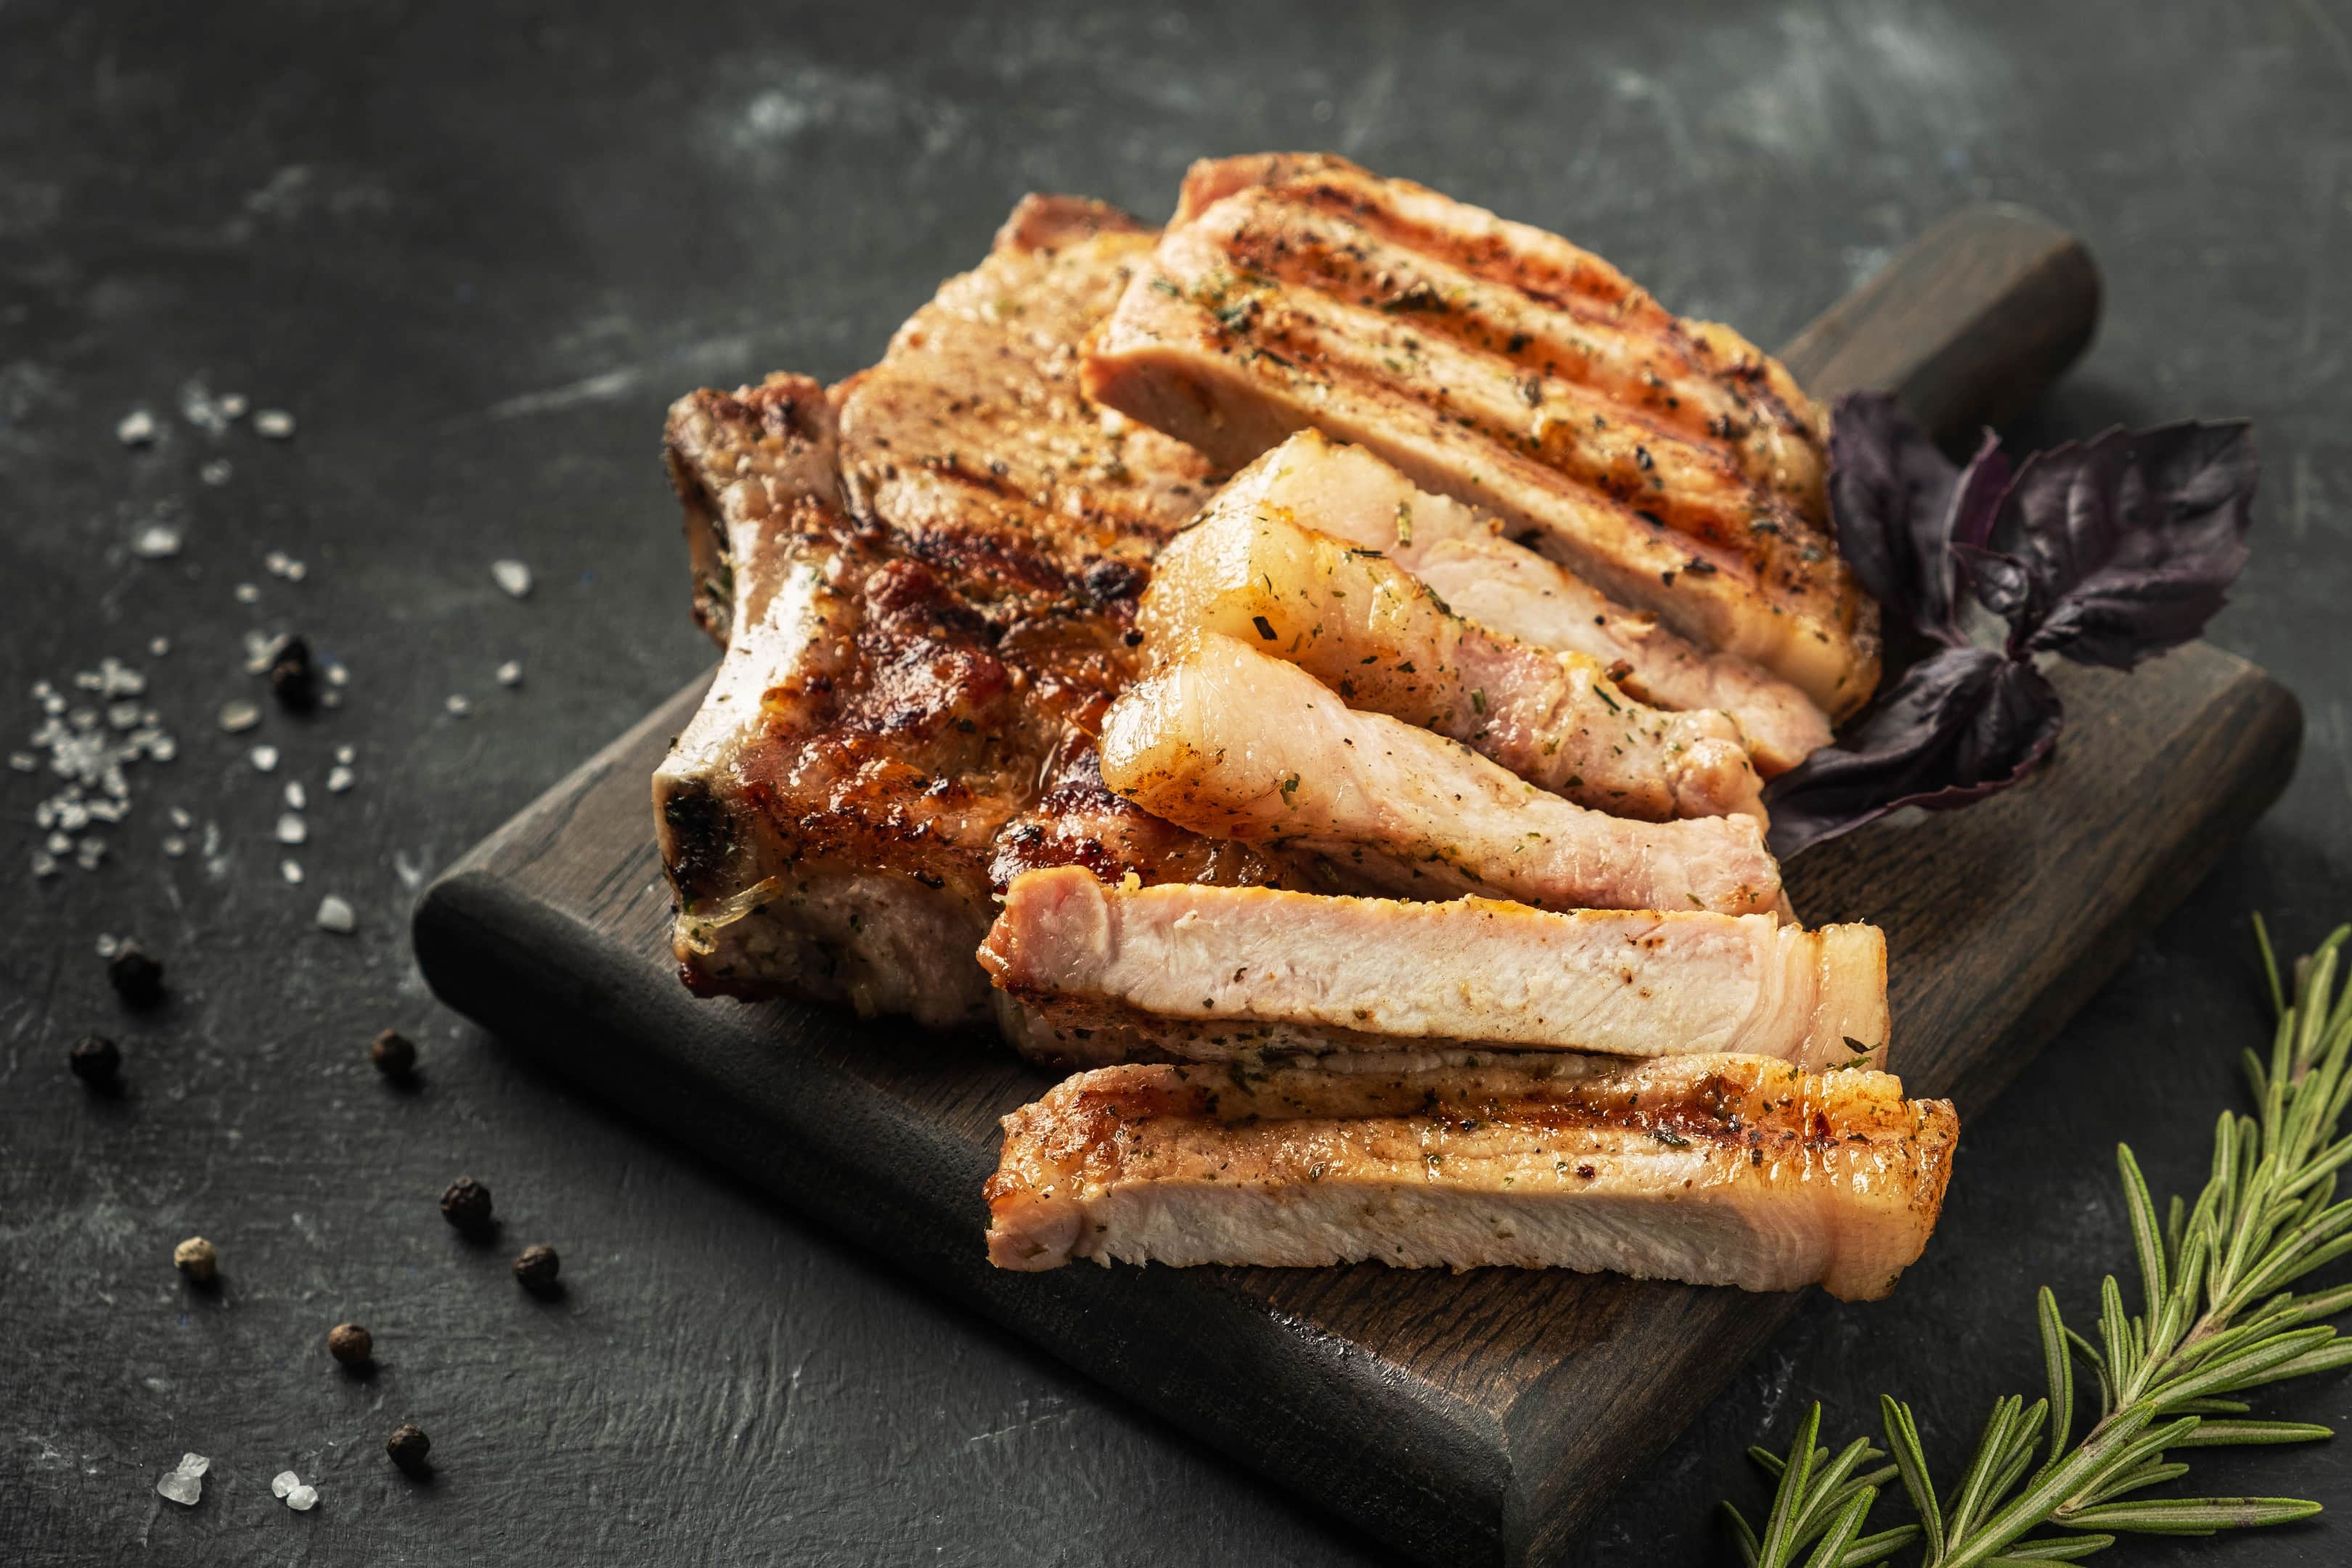 Grilled and sliced pork chops which are foods without folic acid